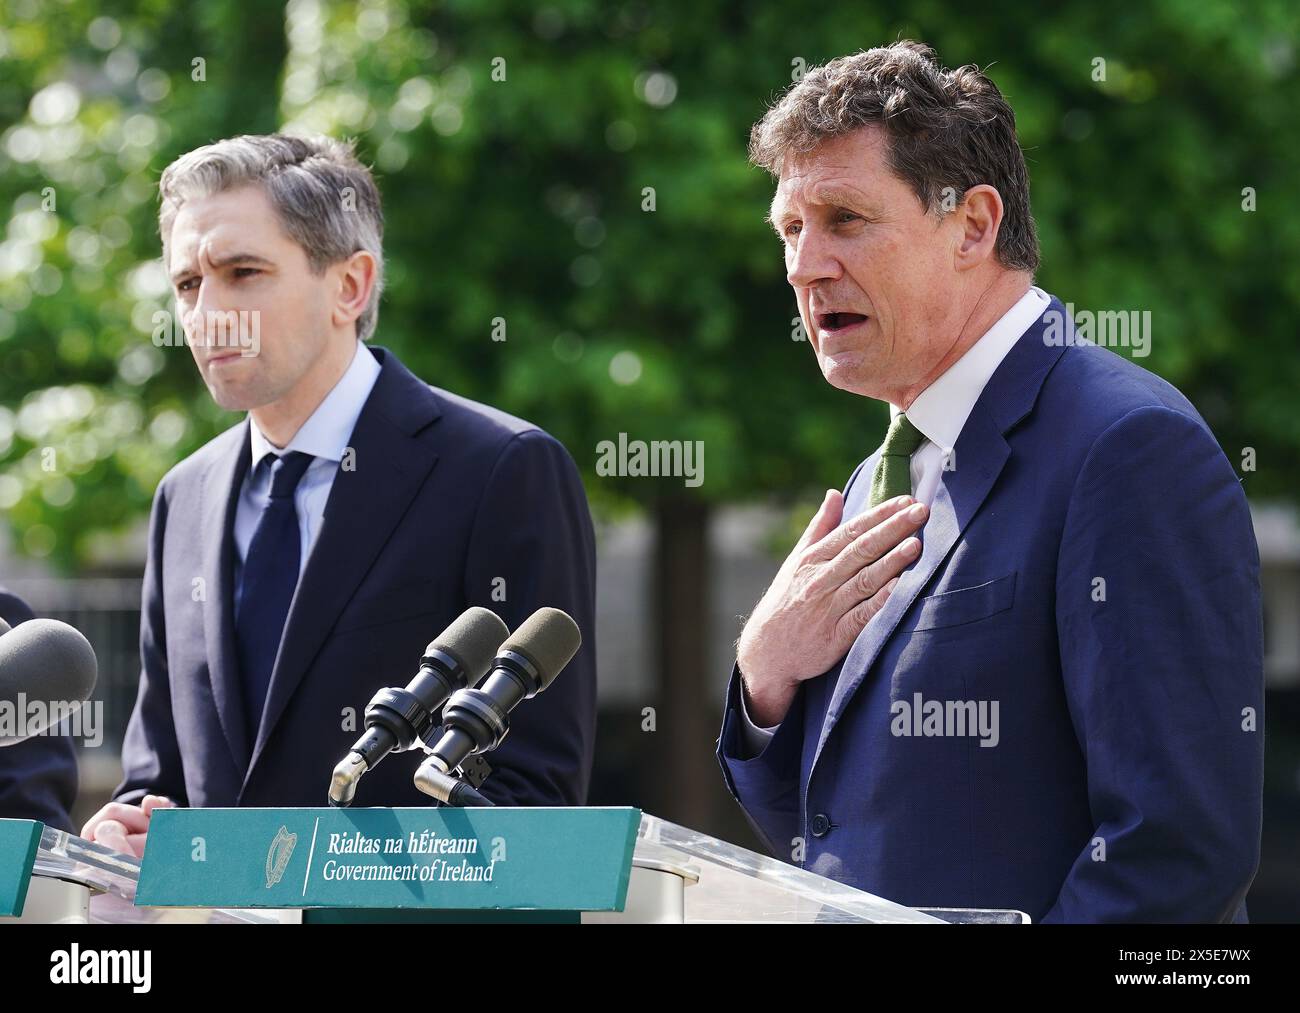 Minister for Environment, Climate, Communications and Transport Eamon Ryan (left) and Taoiseach Simon Harris speaking to the media at Government Buildings, Dublin, during an announcement of the Government’s new Dublin City Taskforce. This follows an early morning operation to remove tents which have been pitched by asylum seekers along a stretch of the Grand Canal, Dublin. The asylum claimants moved into the area after another makeshift migrant camp surrounding the International Protection Office (IPO) on Mount Street, Dublin, was dismantled in multi-agency operation last week. Picture date: T Stock Photo